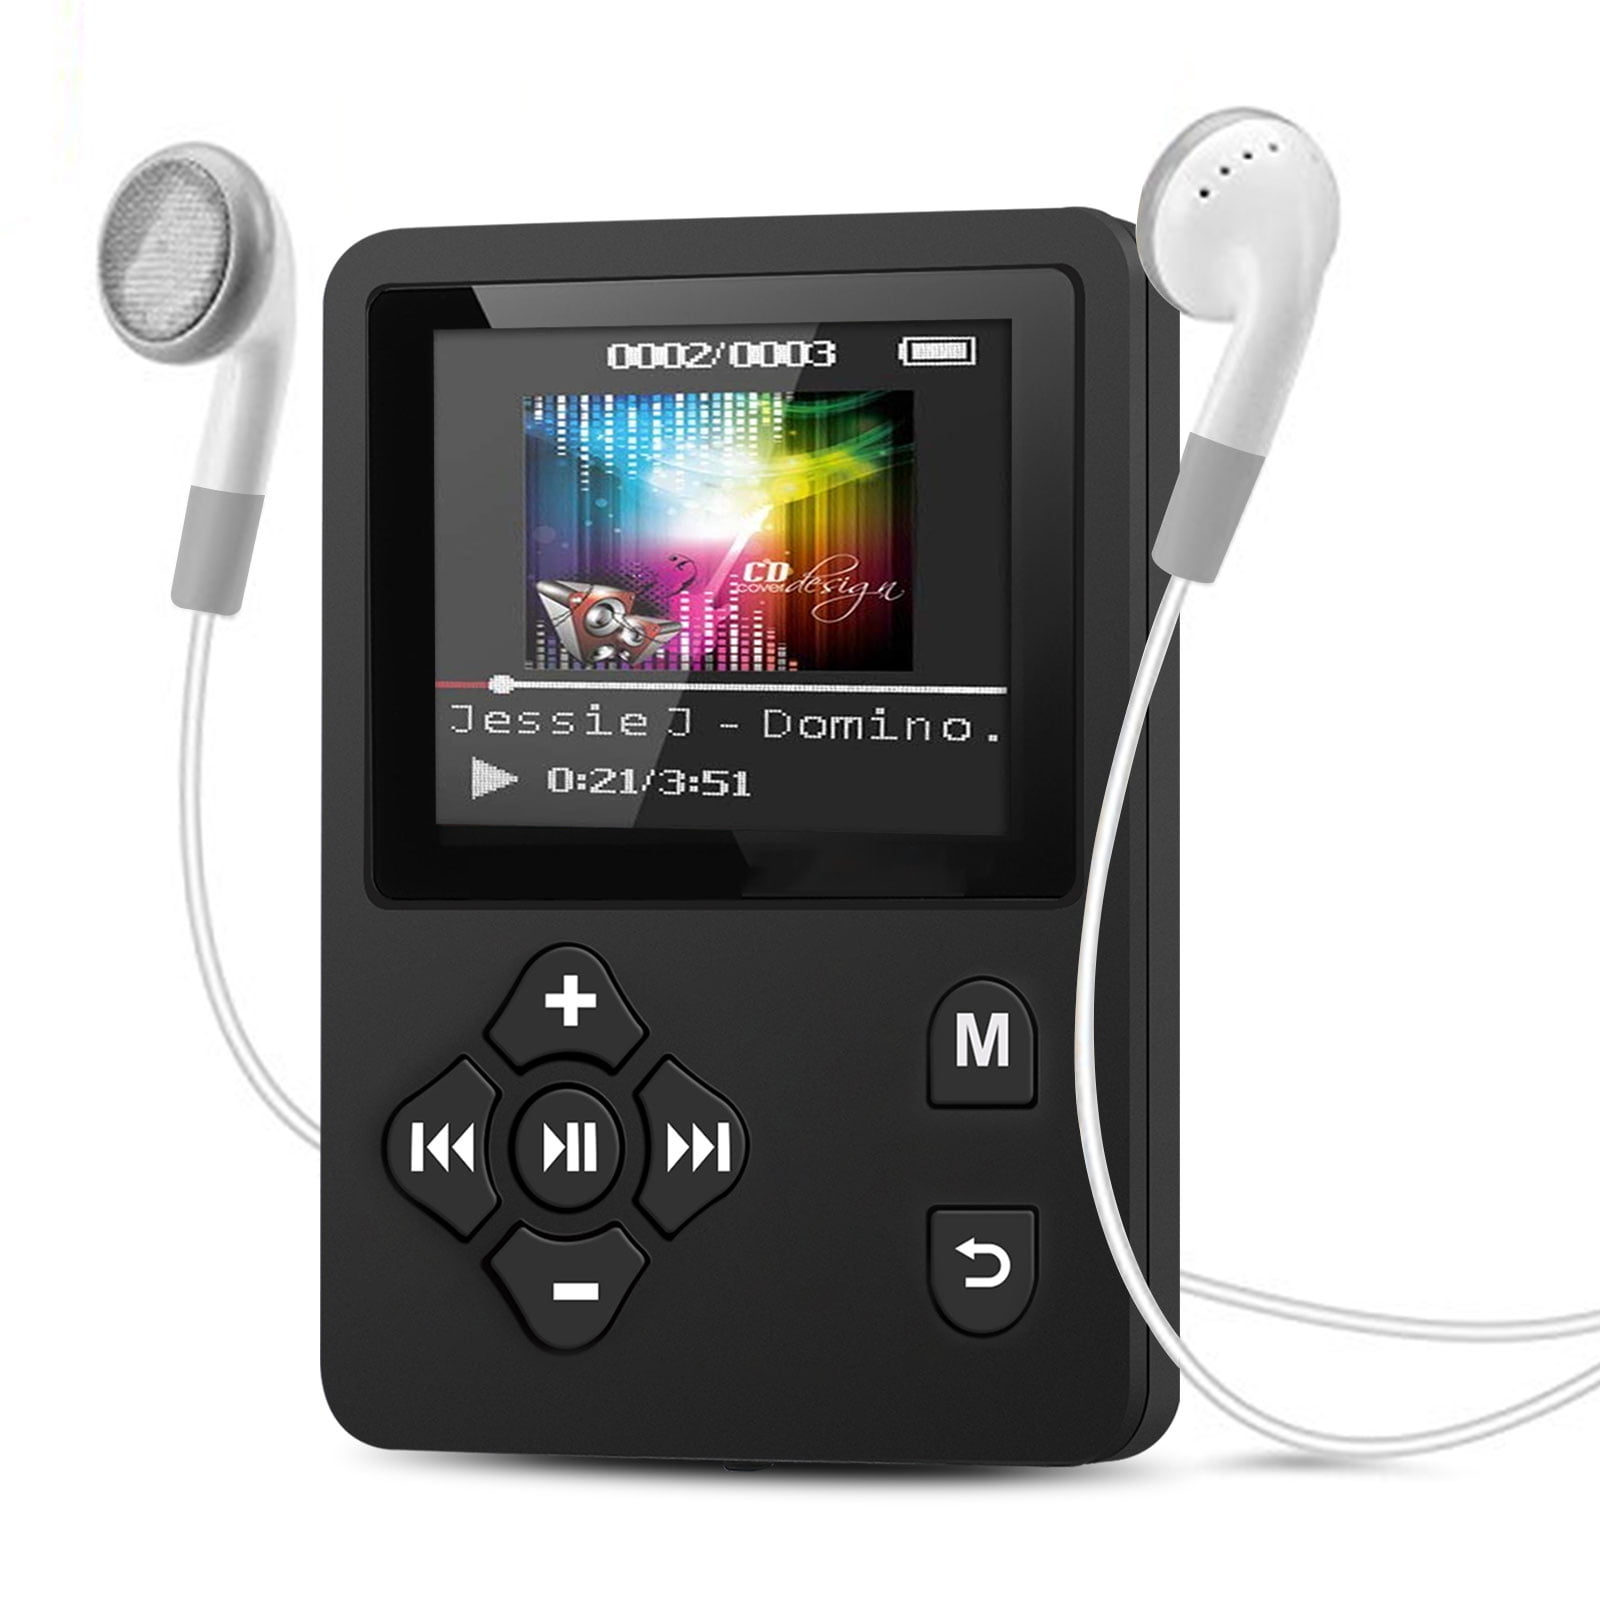 MP3 Player - 32GB Supported MP3 Player, Portable Lossless Sound MP3